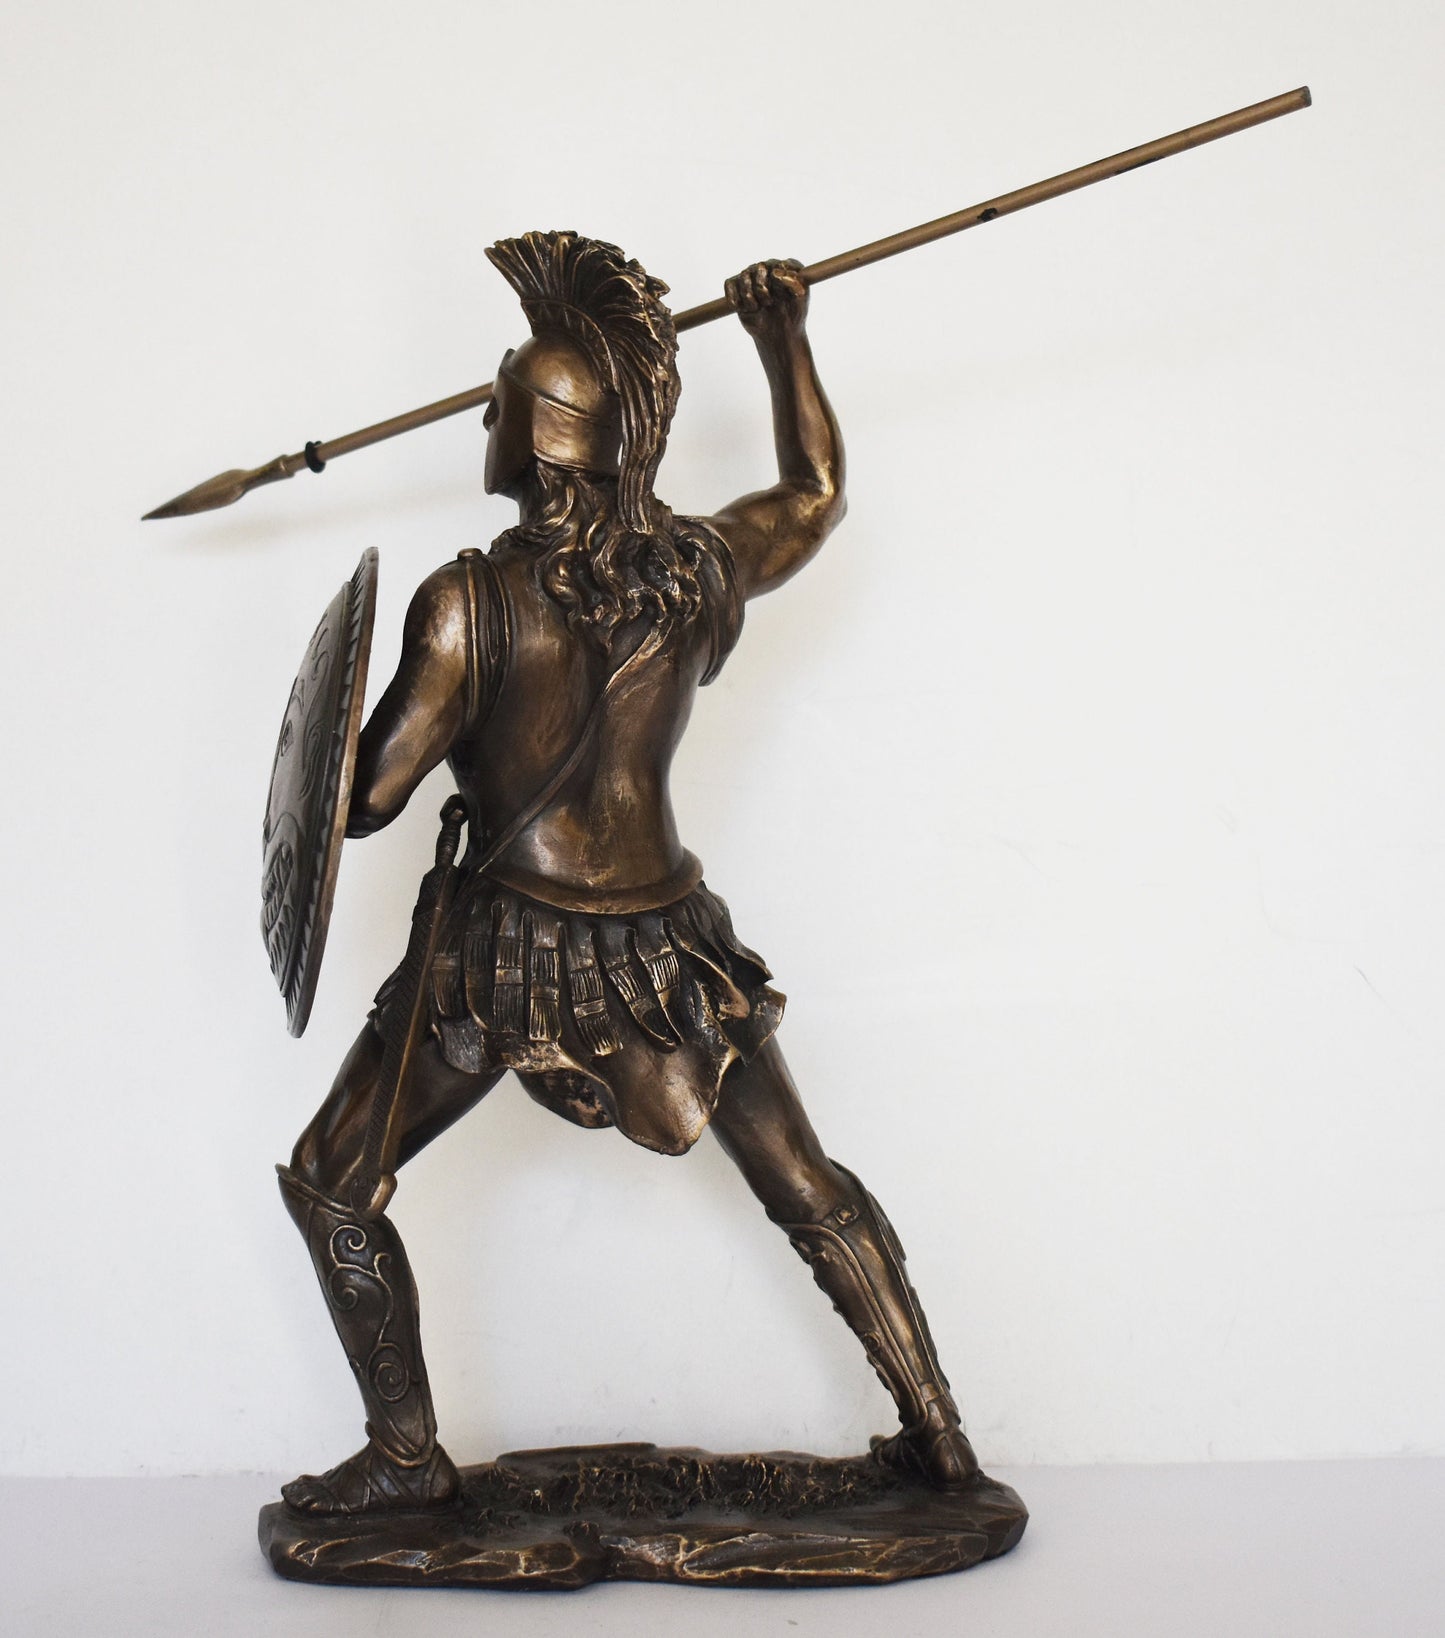 Ajax the Great - Son of Telamon, King of Salamis - Hero of Trojan War -  Warrior of Great Courage - Cold Cast Bronze Resin